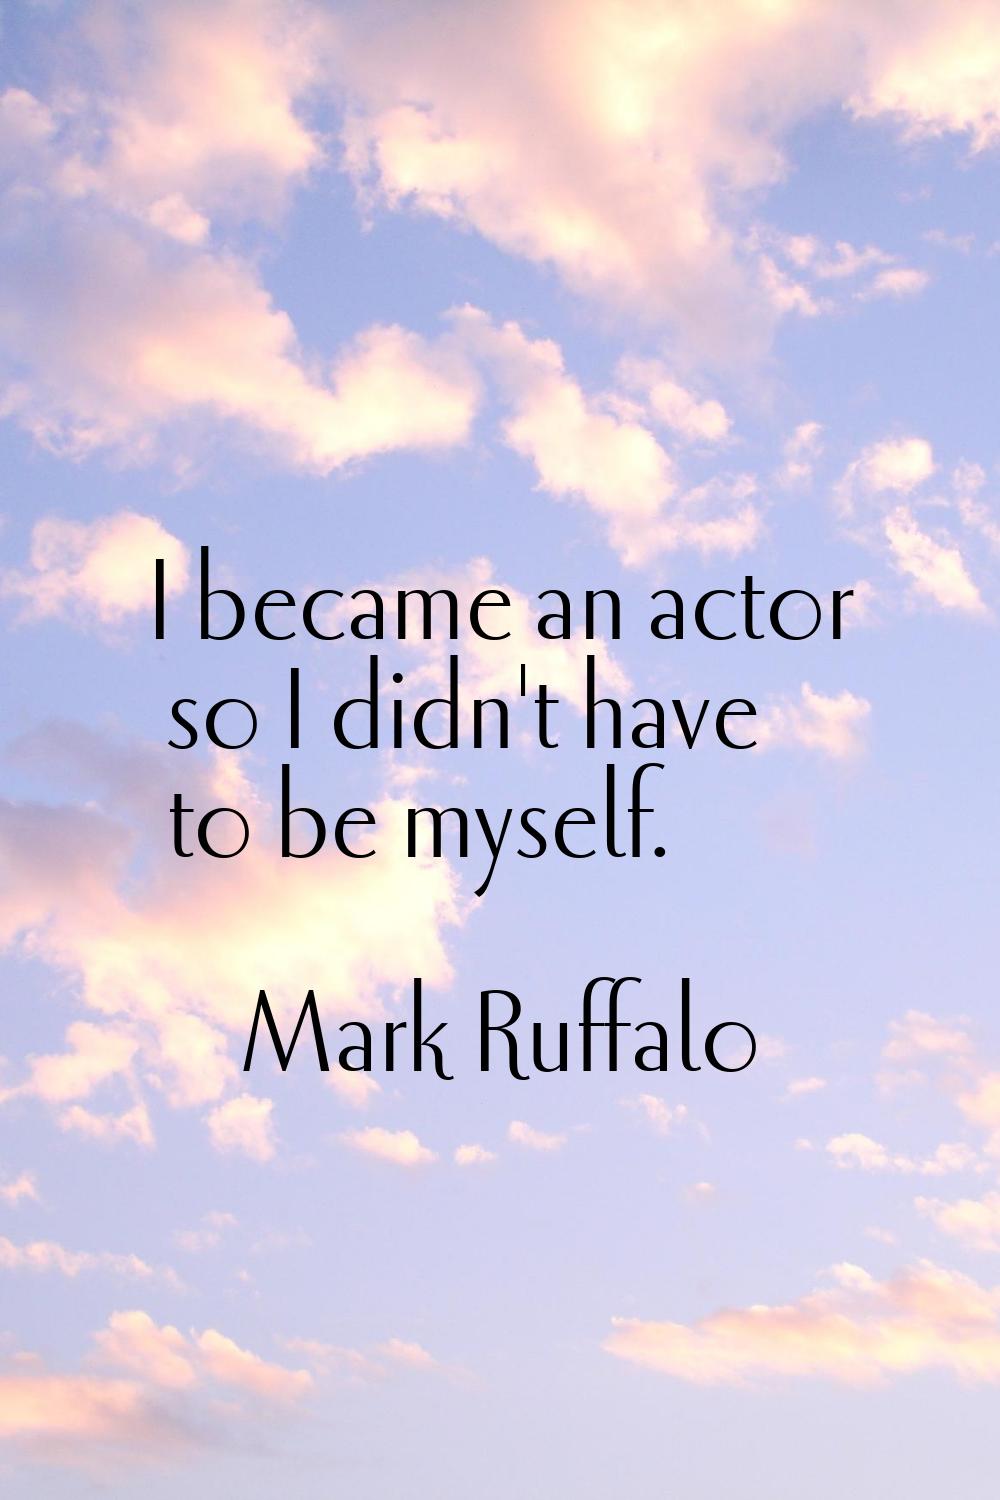 I became an actor so I didn't have to be myself.